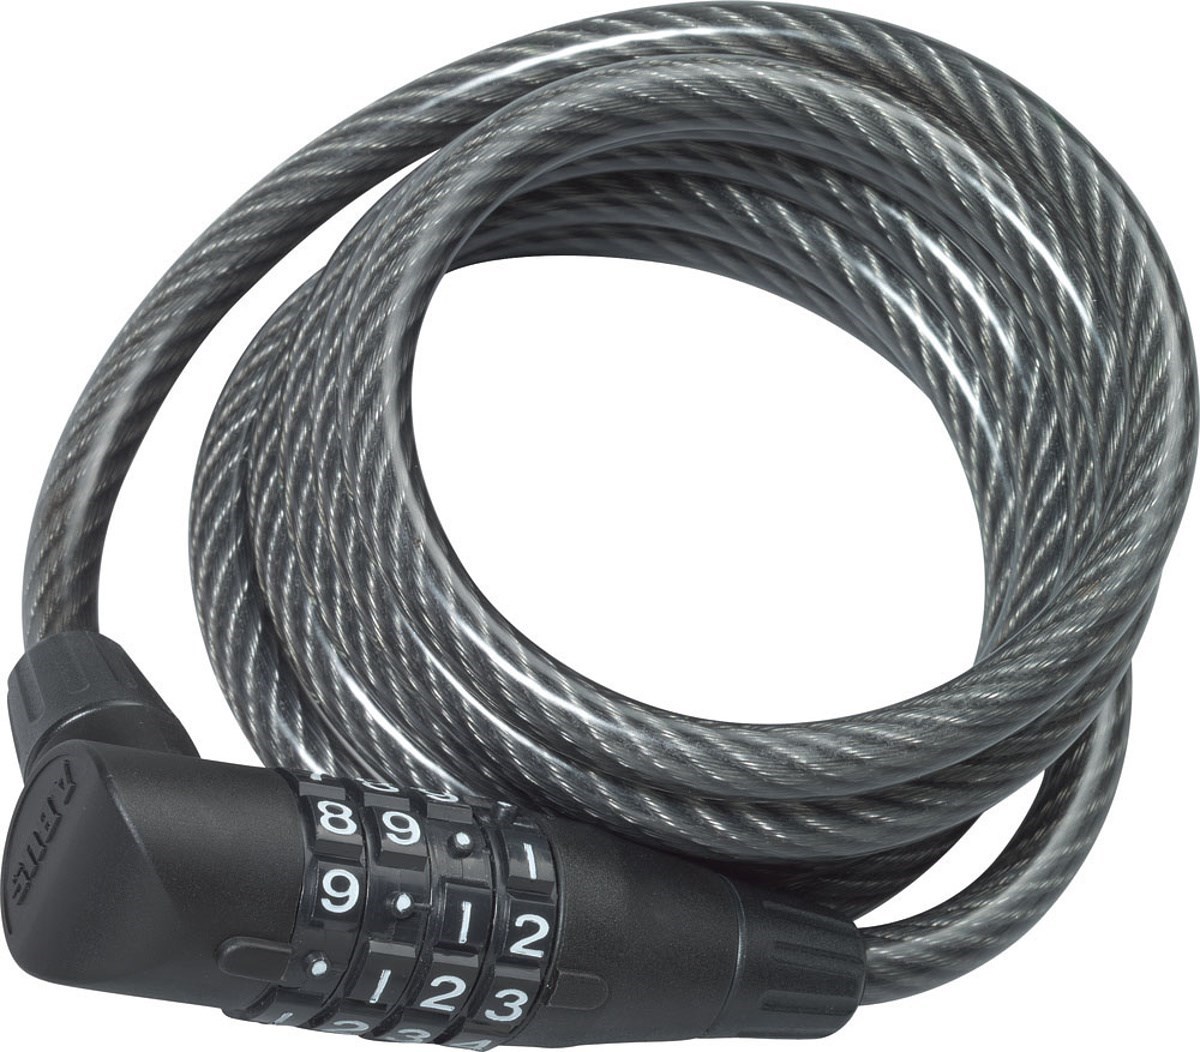 Abus 1250 Combination Cable Lock product image